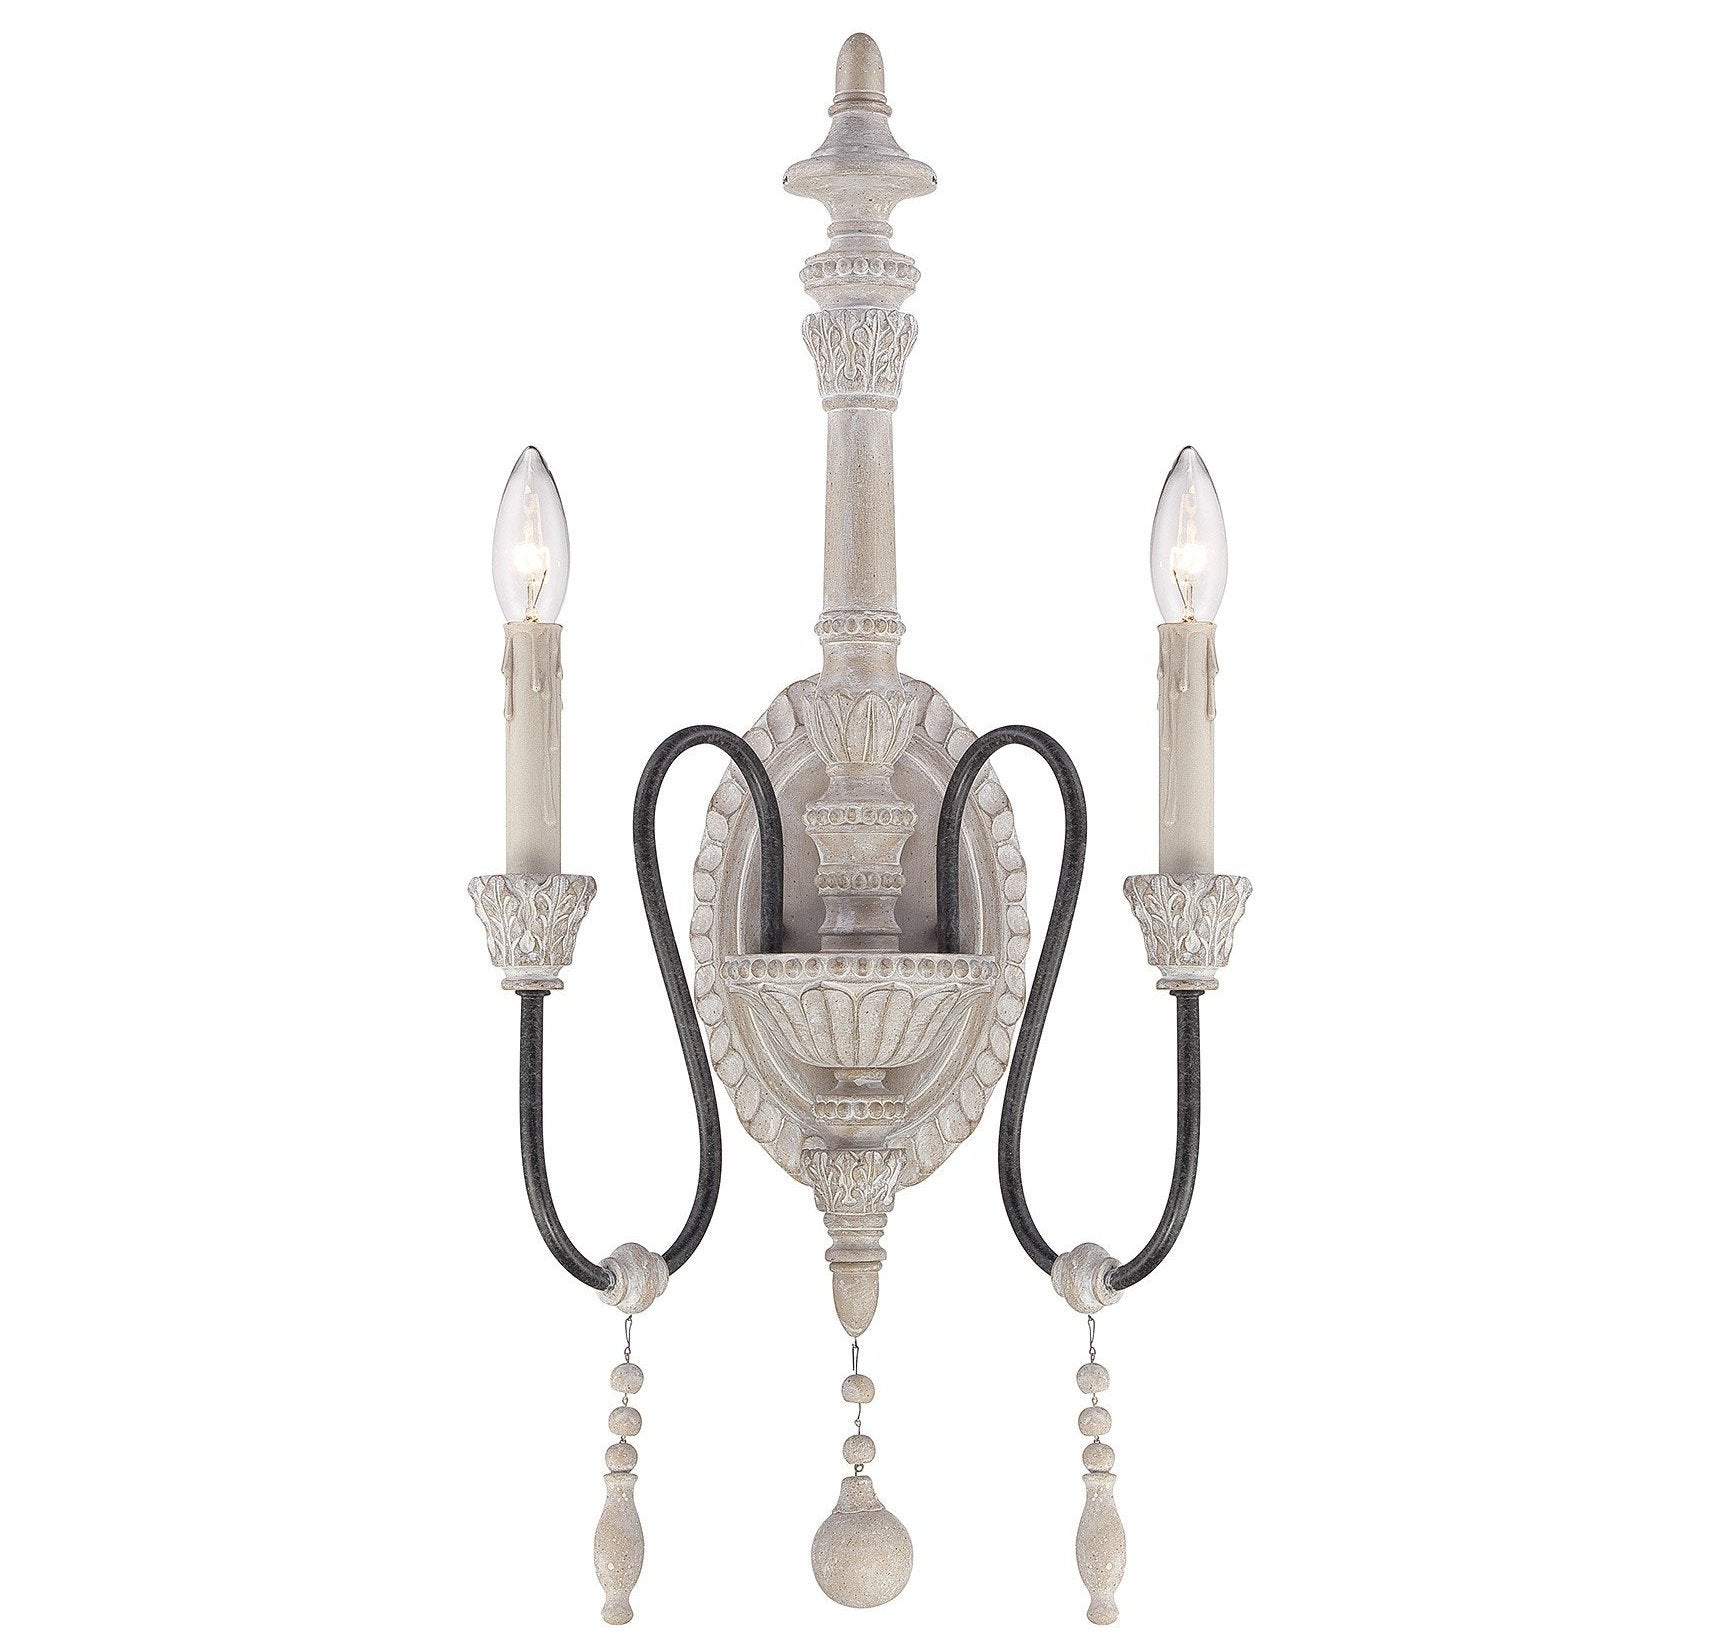 Ashland 2 Light Wall Sconce in White Washed Driftwood by Savoy House 9-293-2-23